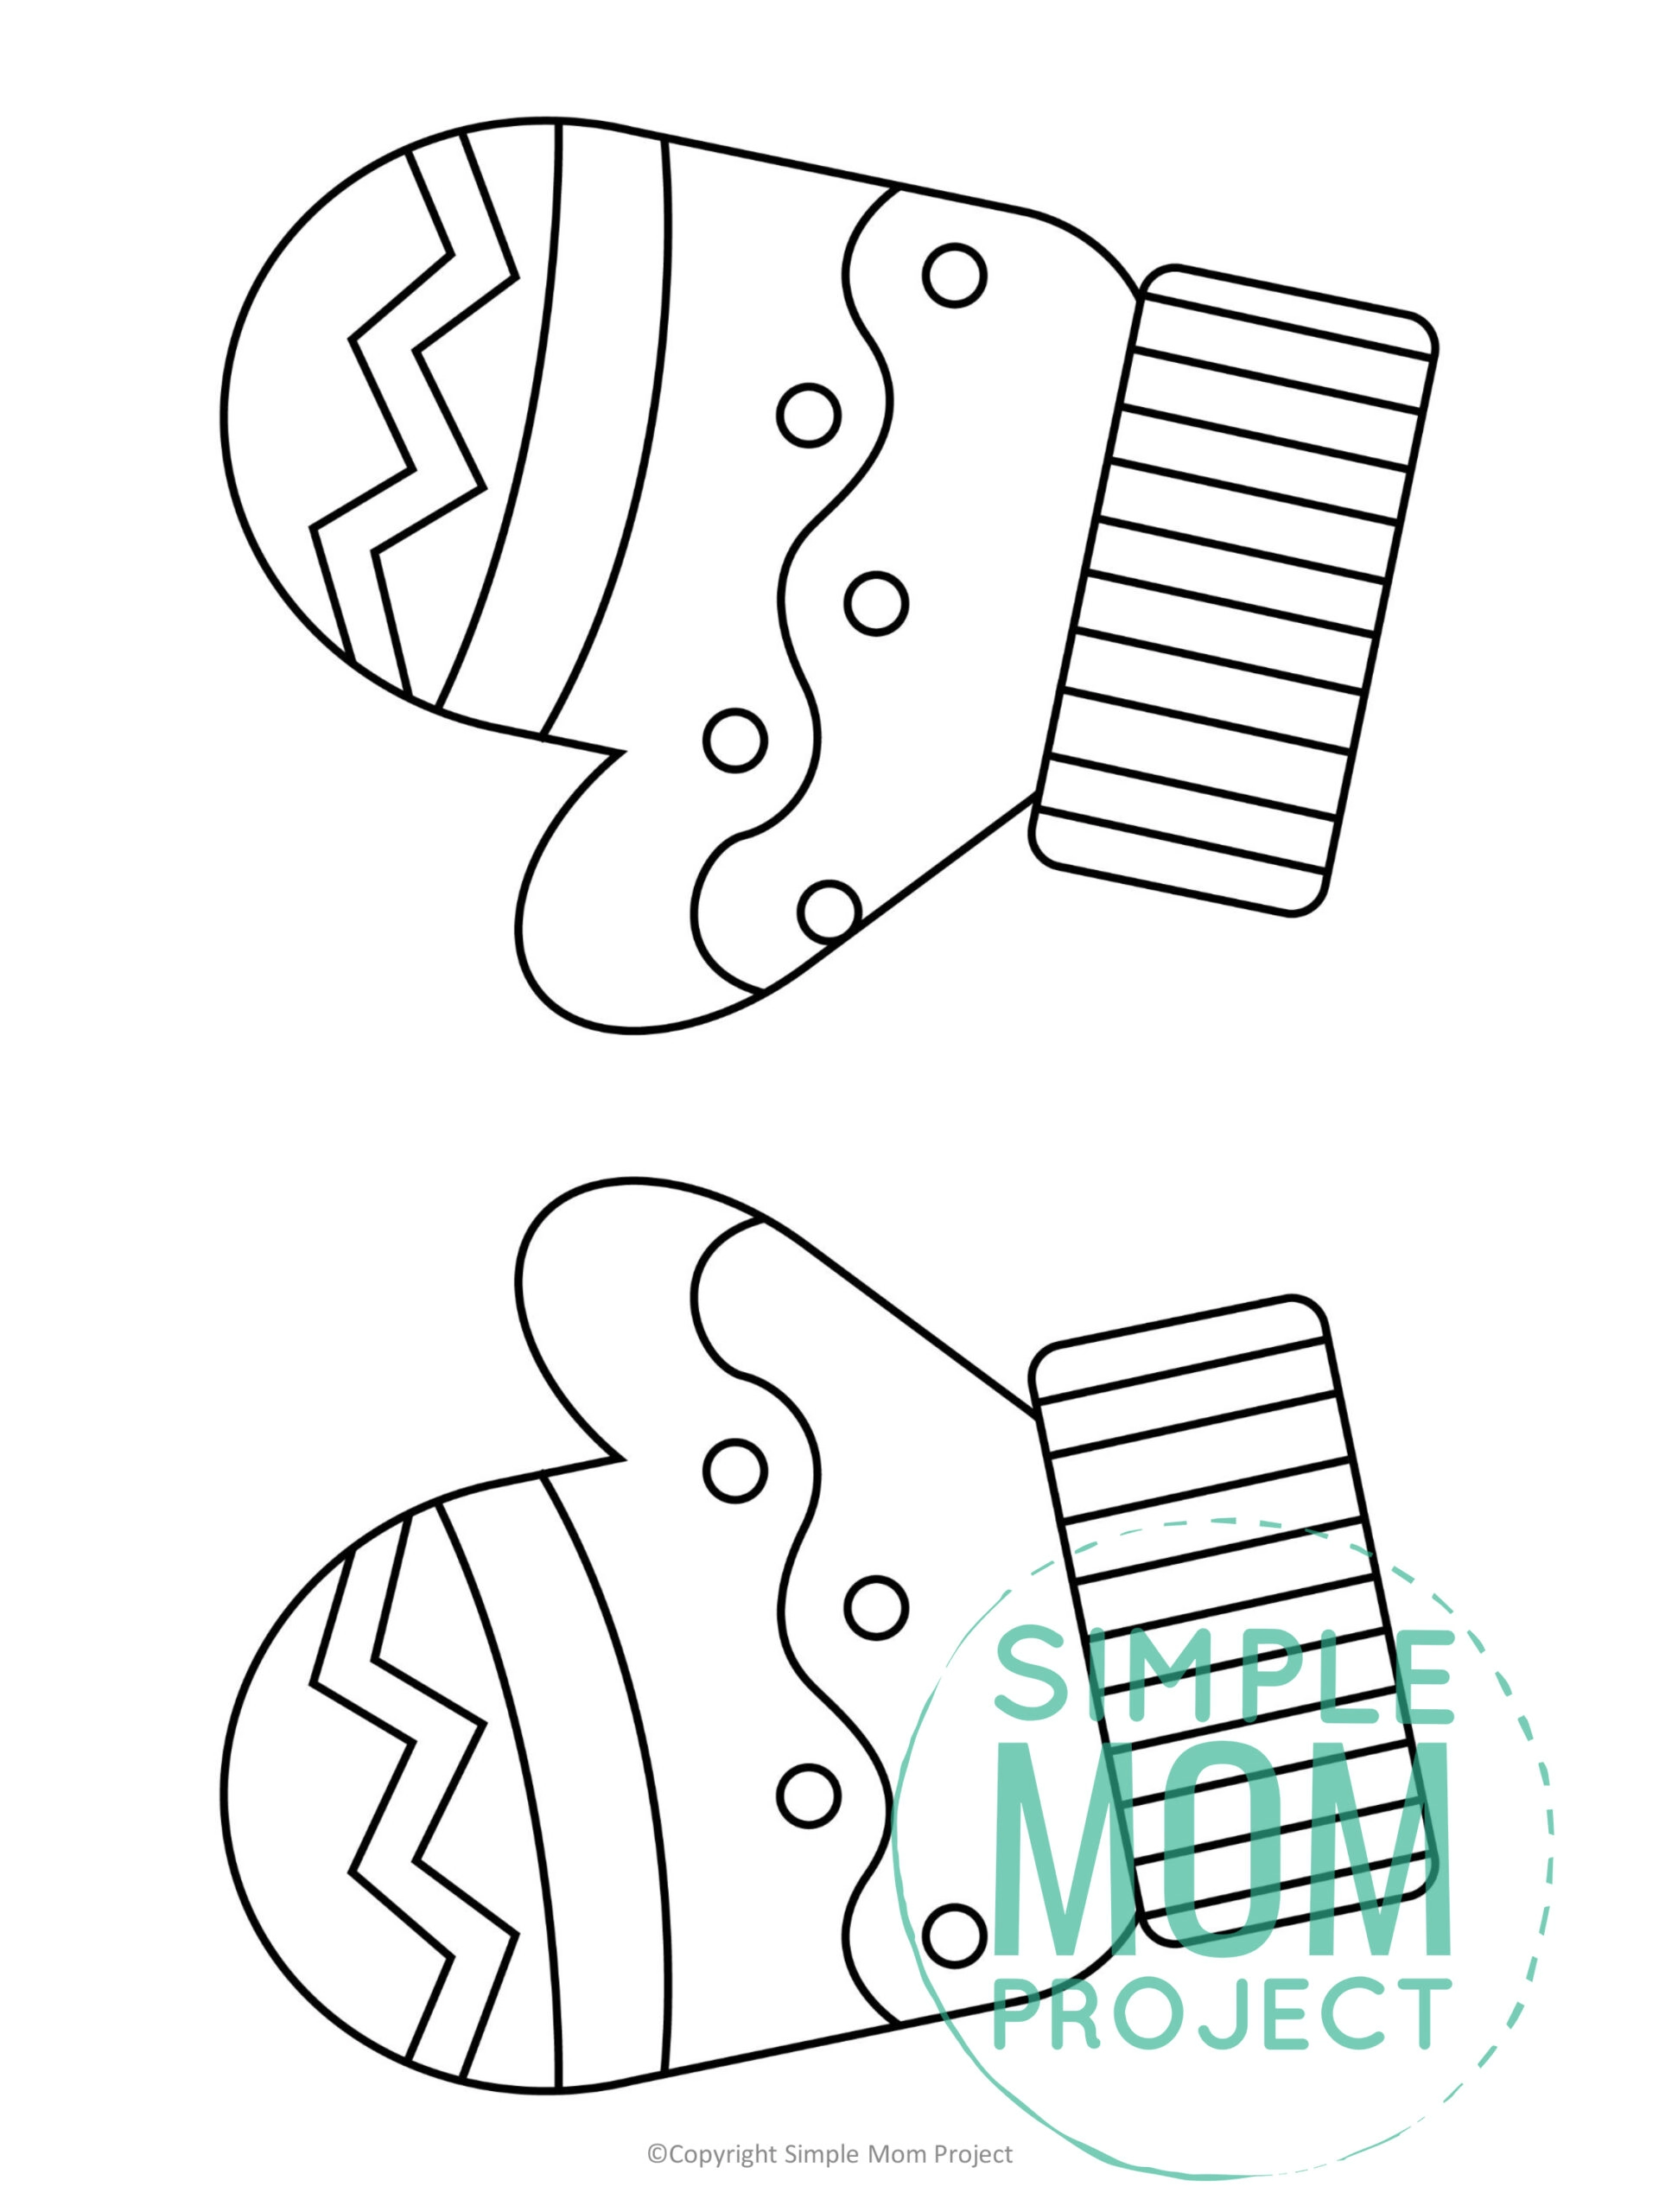 Free printable mittens template â simple mom project